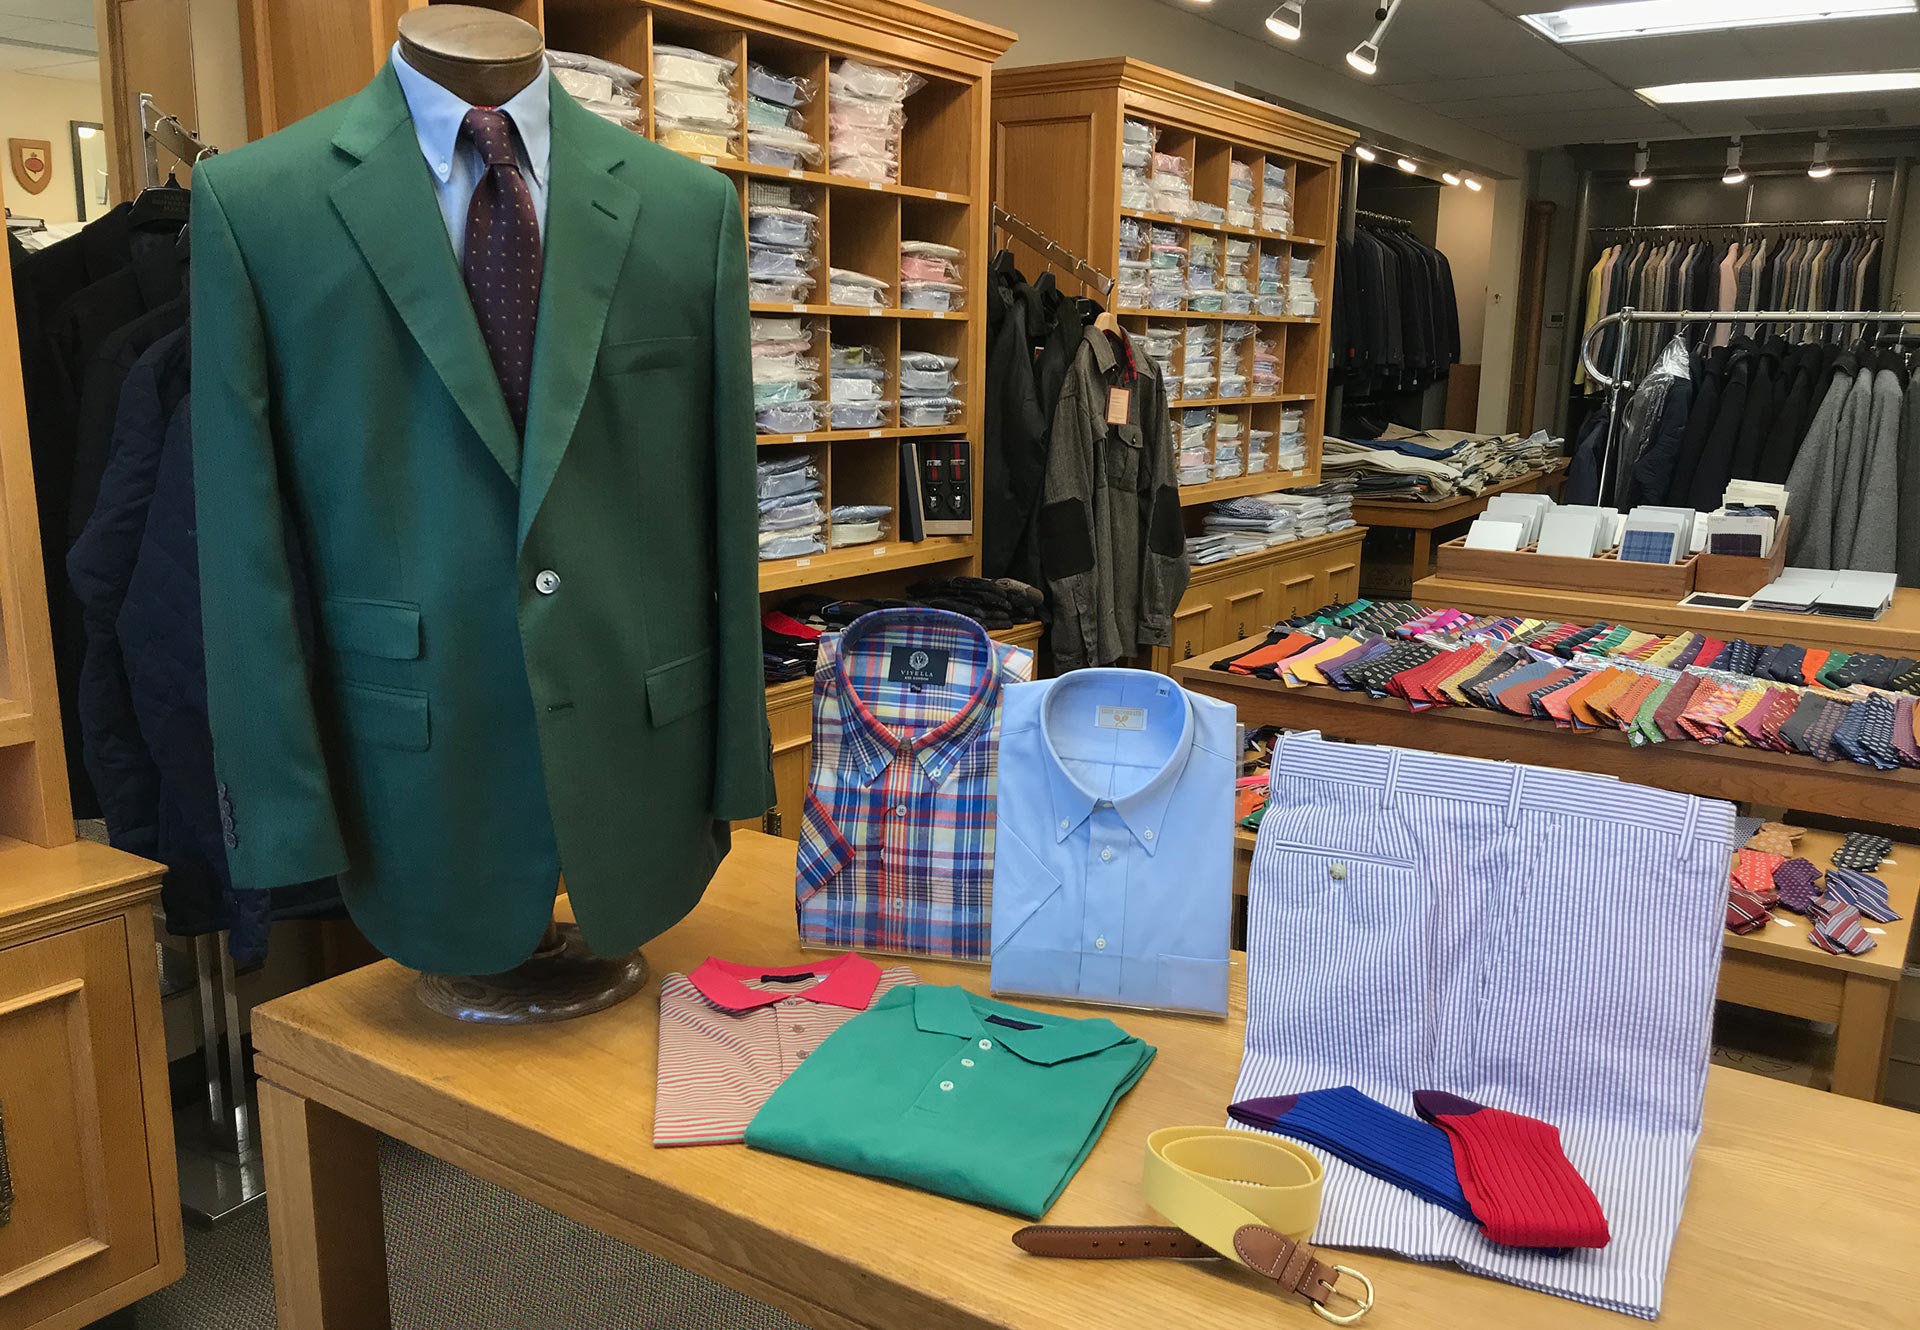 Store photo with green sport coat, short sleeve shirts, and seersucker shorts